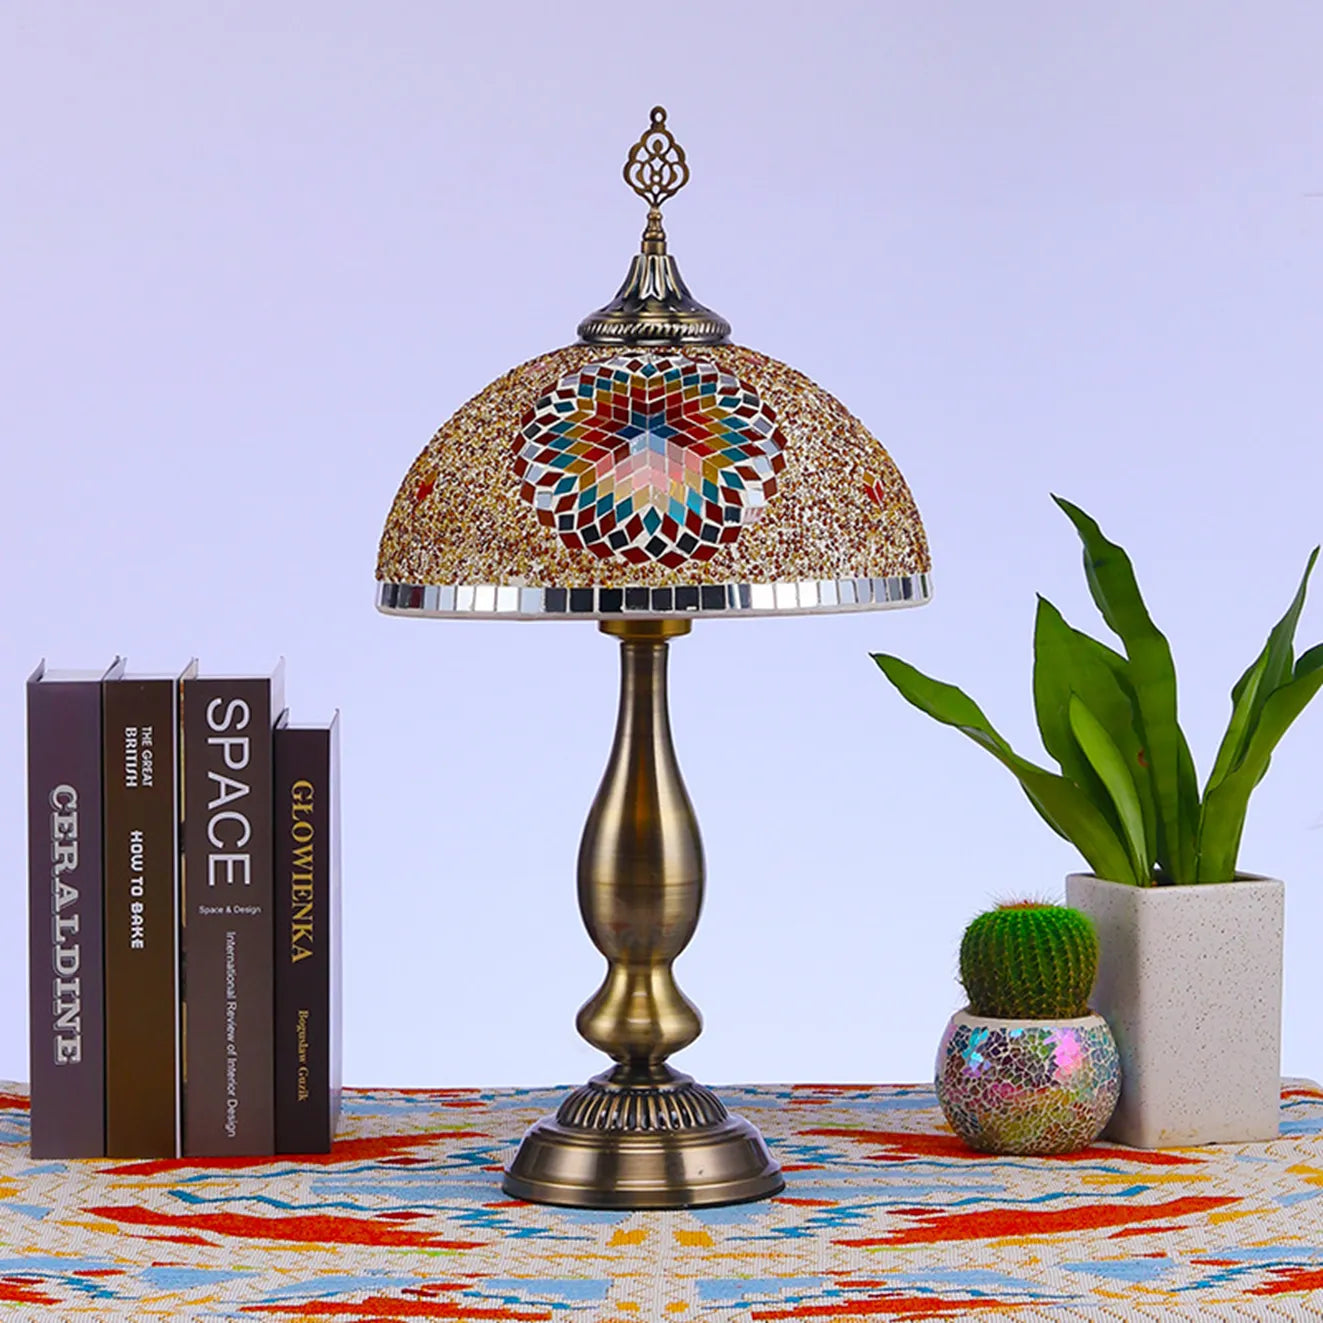 handmade-bohemian-classic-vintage-style-table-warm-light-lamp-handcrafted-home-decor-multi-colour-royal